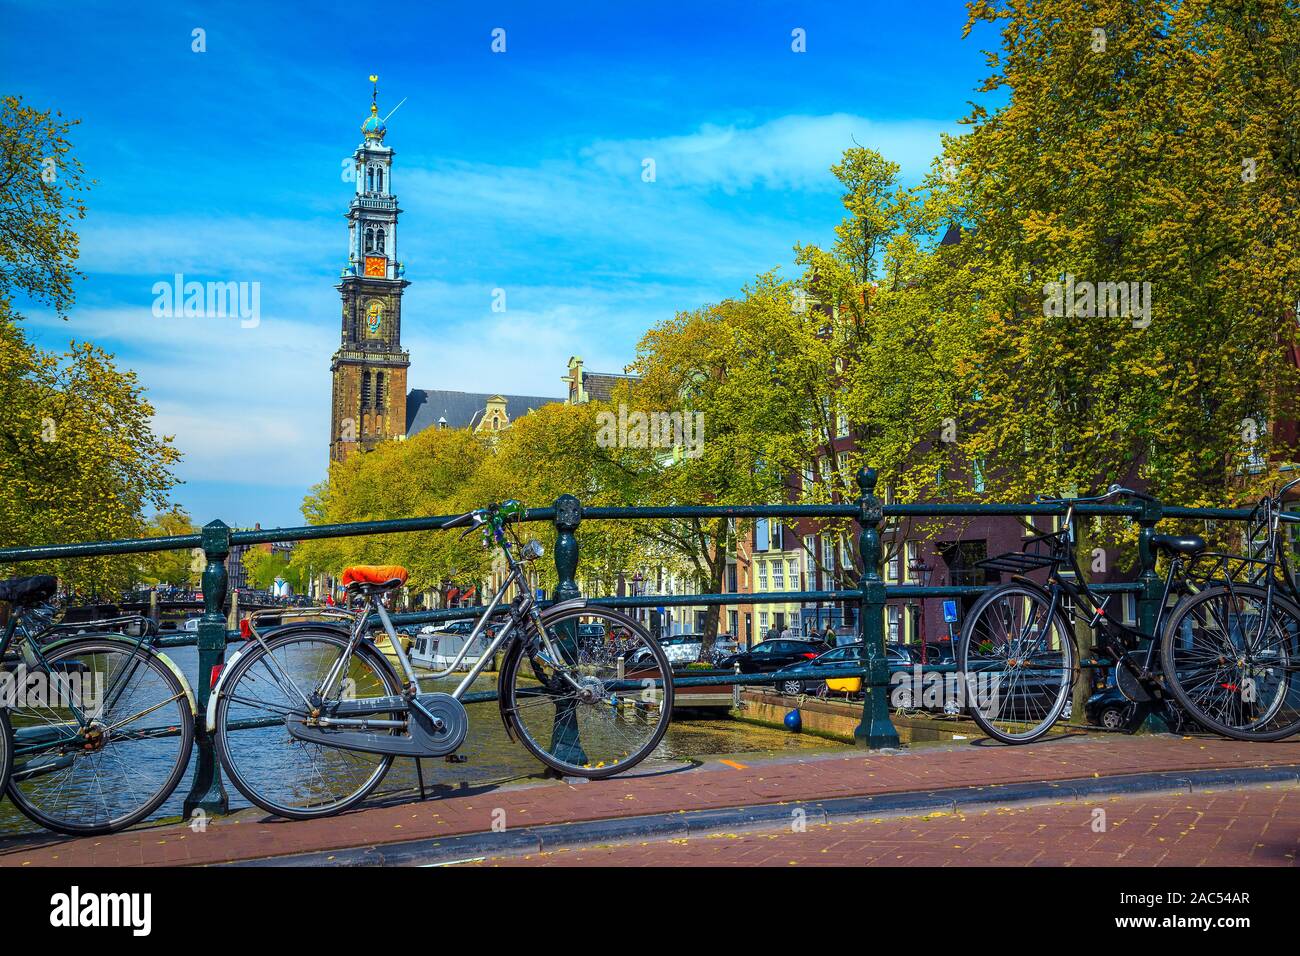 Popular travel and touristic destination in Netherlands. Bicycles on the bridge and spectacular water canals in Amsterdam, Netherlands, Europe Stock Photo